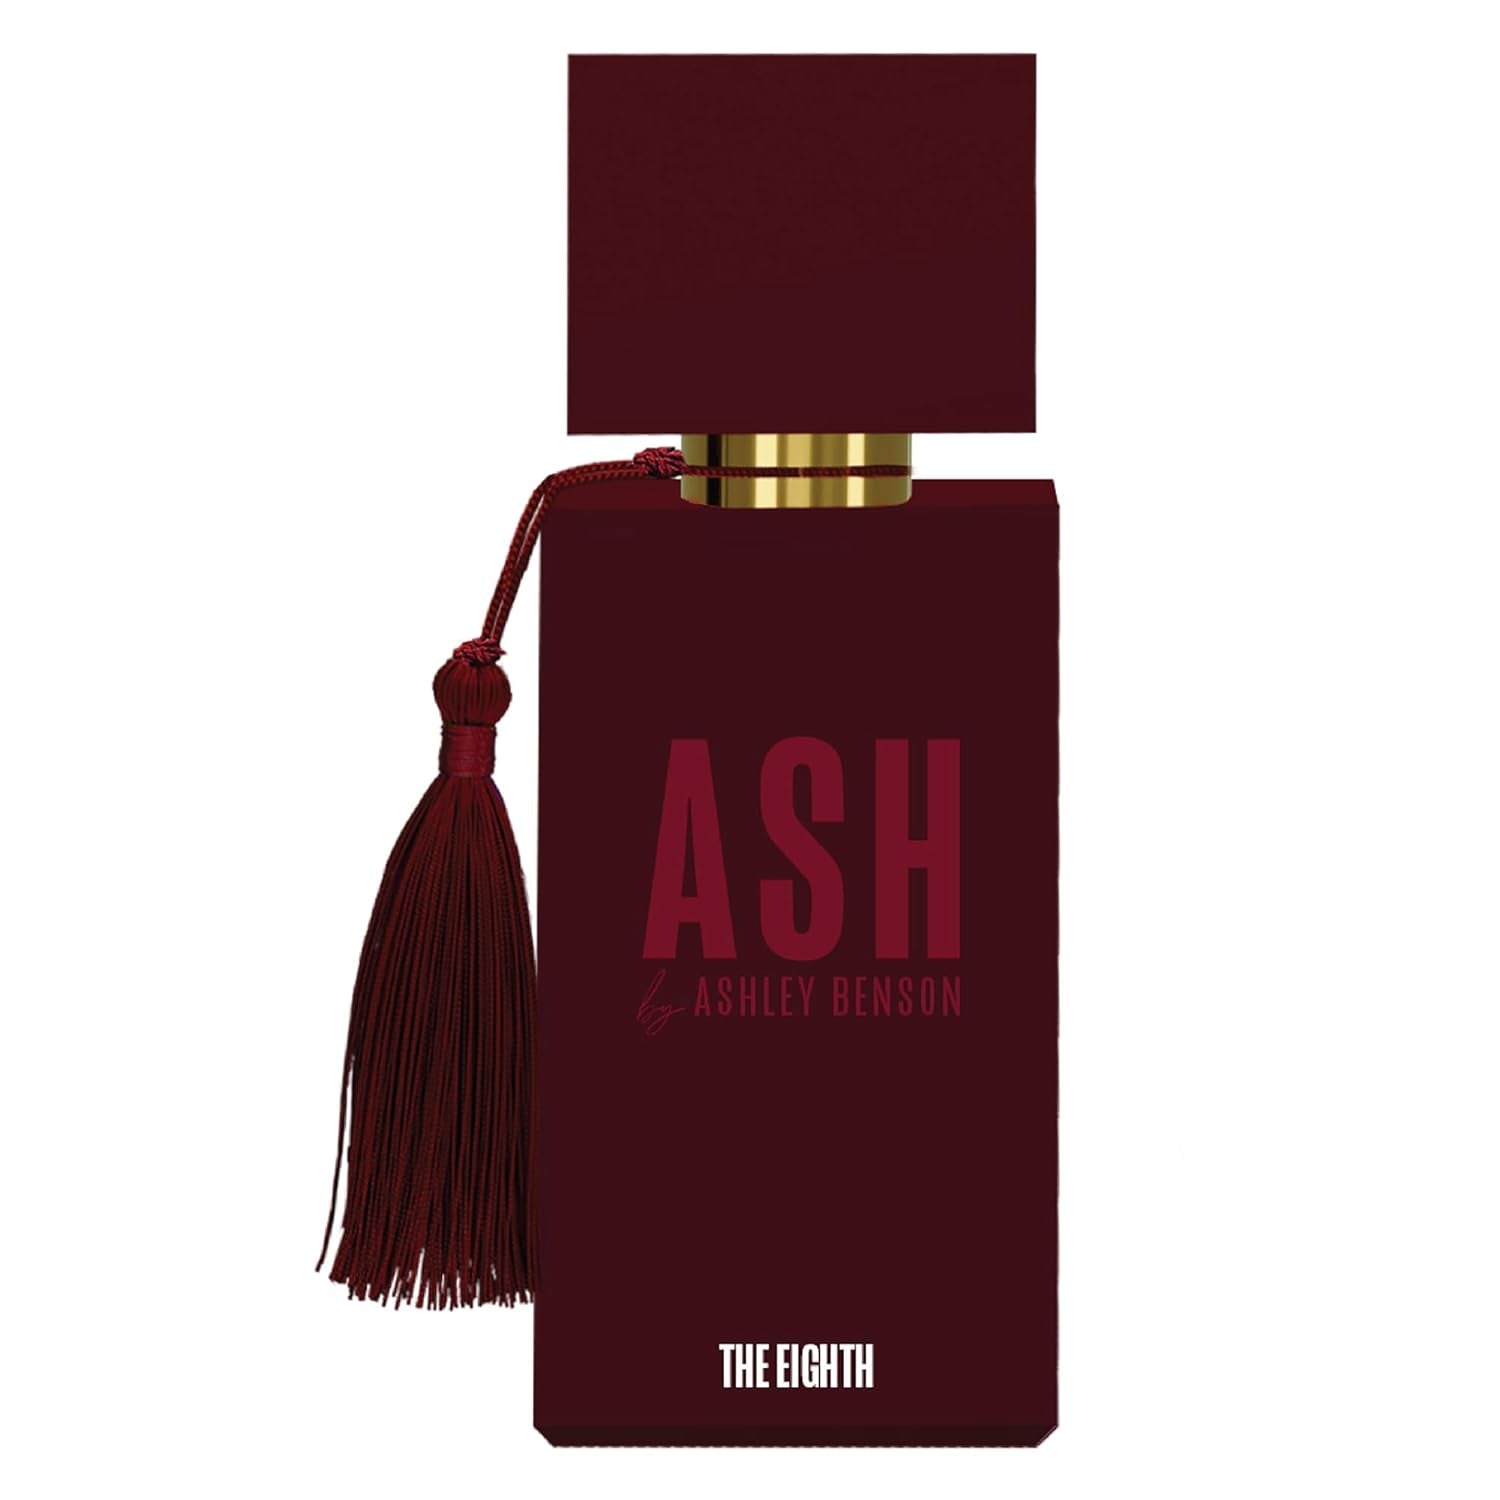 Ash by Ashley Benson The Eighth Perfume for Men and Women - Sensual, Romantic Fragrance - Appealing Scent of Paris - With Citrus Bergamot, Soft Musk, and Cashmere Woods - 1.7 oz EDP Spray